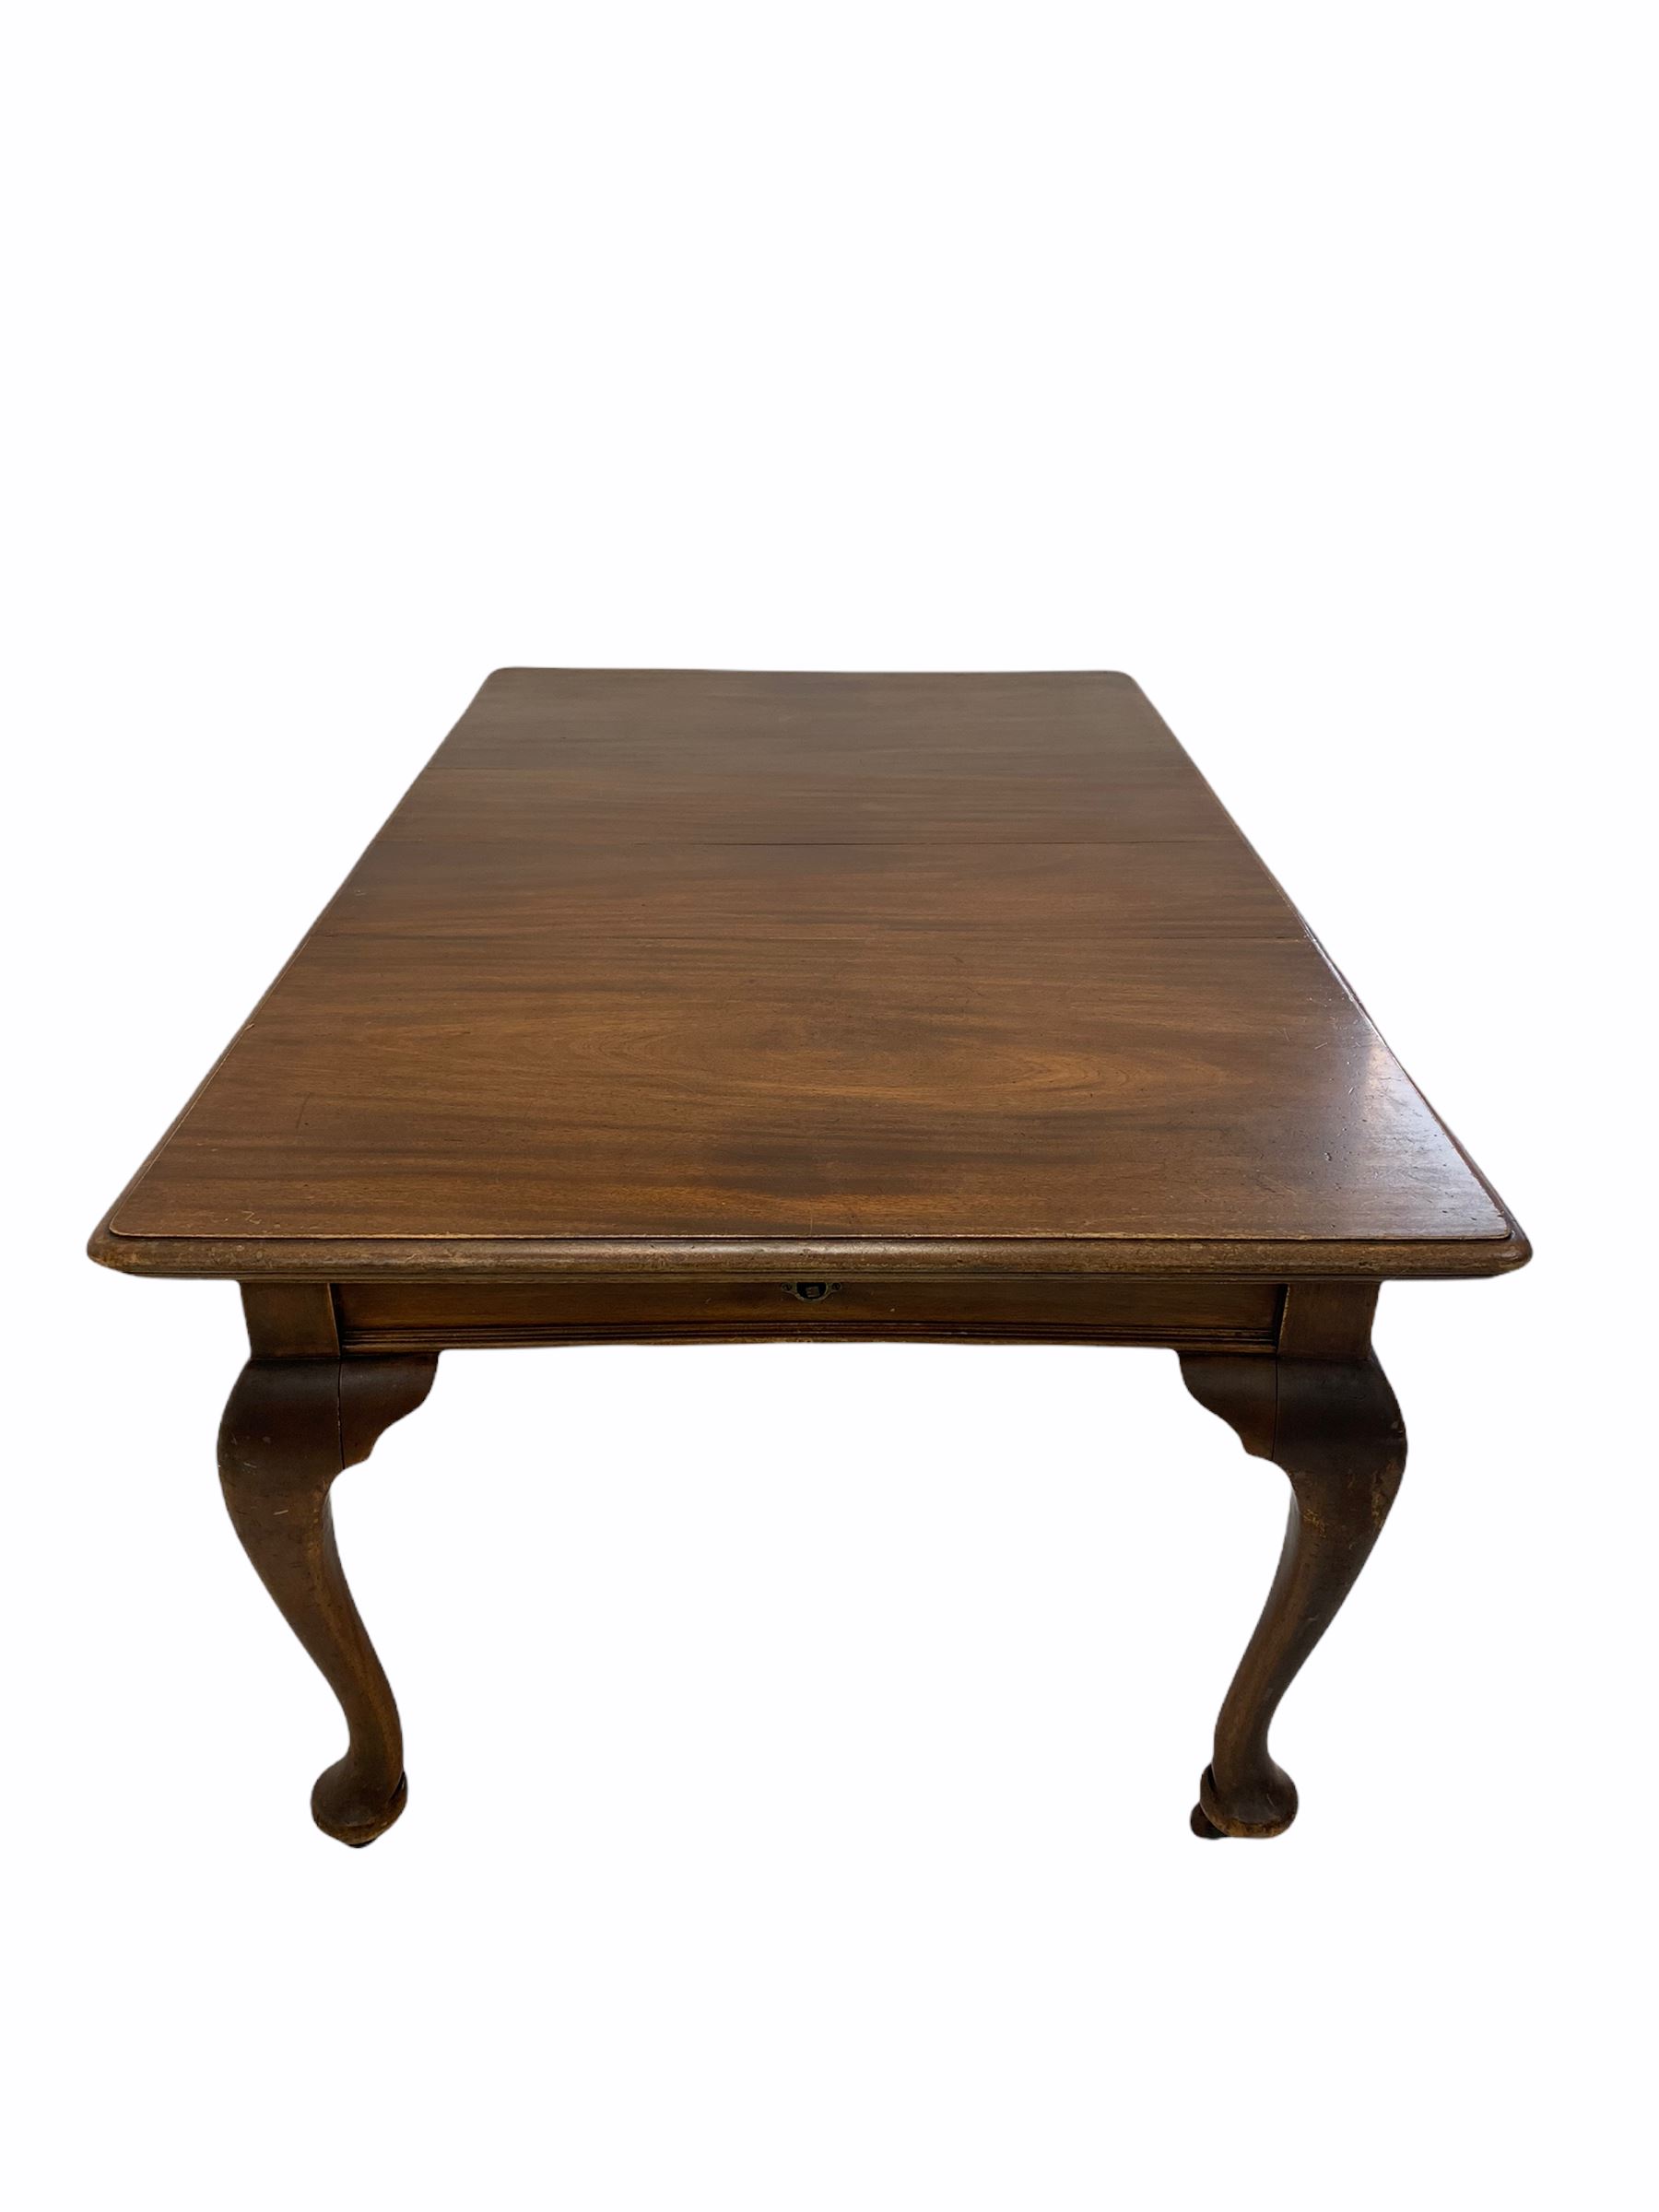 Early 20th century mahogany wind out extending dining table - Image 4 of 4